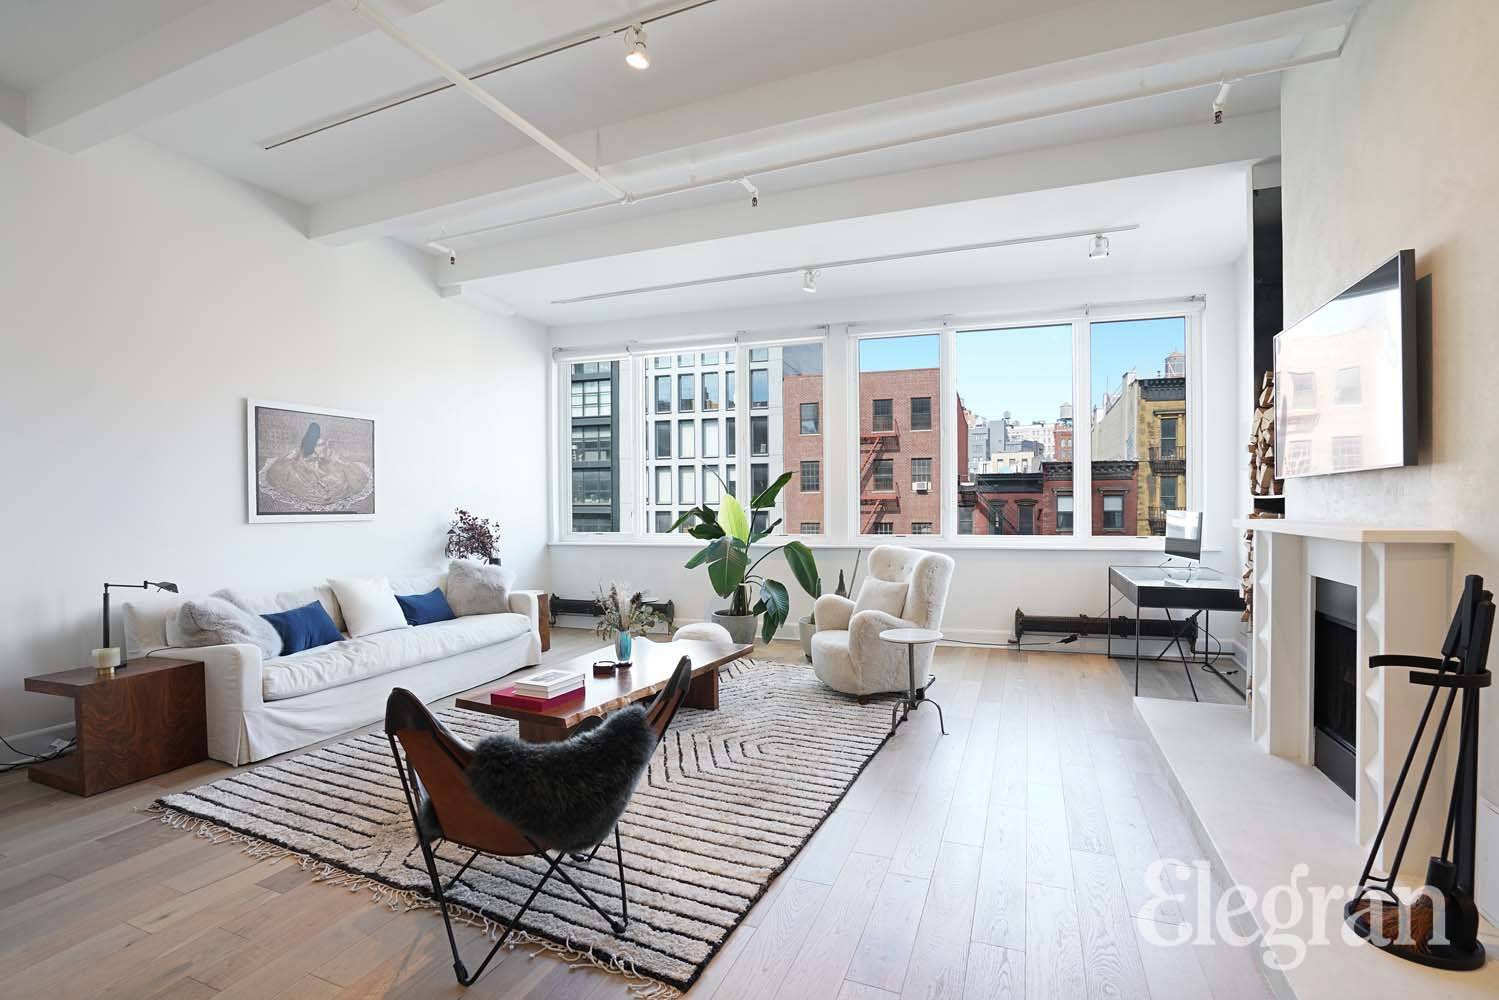 Immerse yourself in a life of comfort and convenience with this stunning apartment at 259 Bowery.